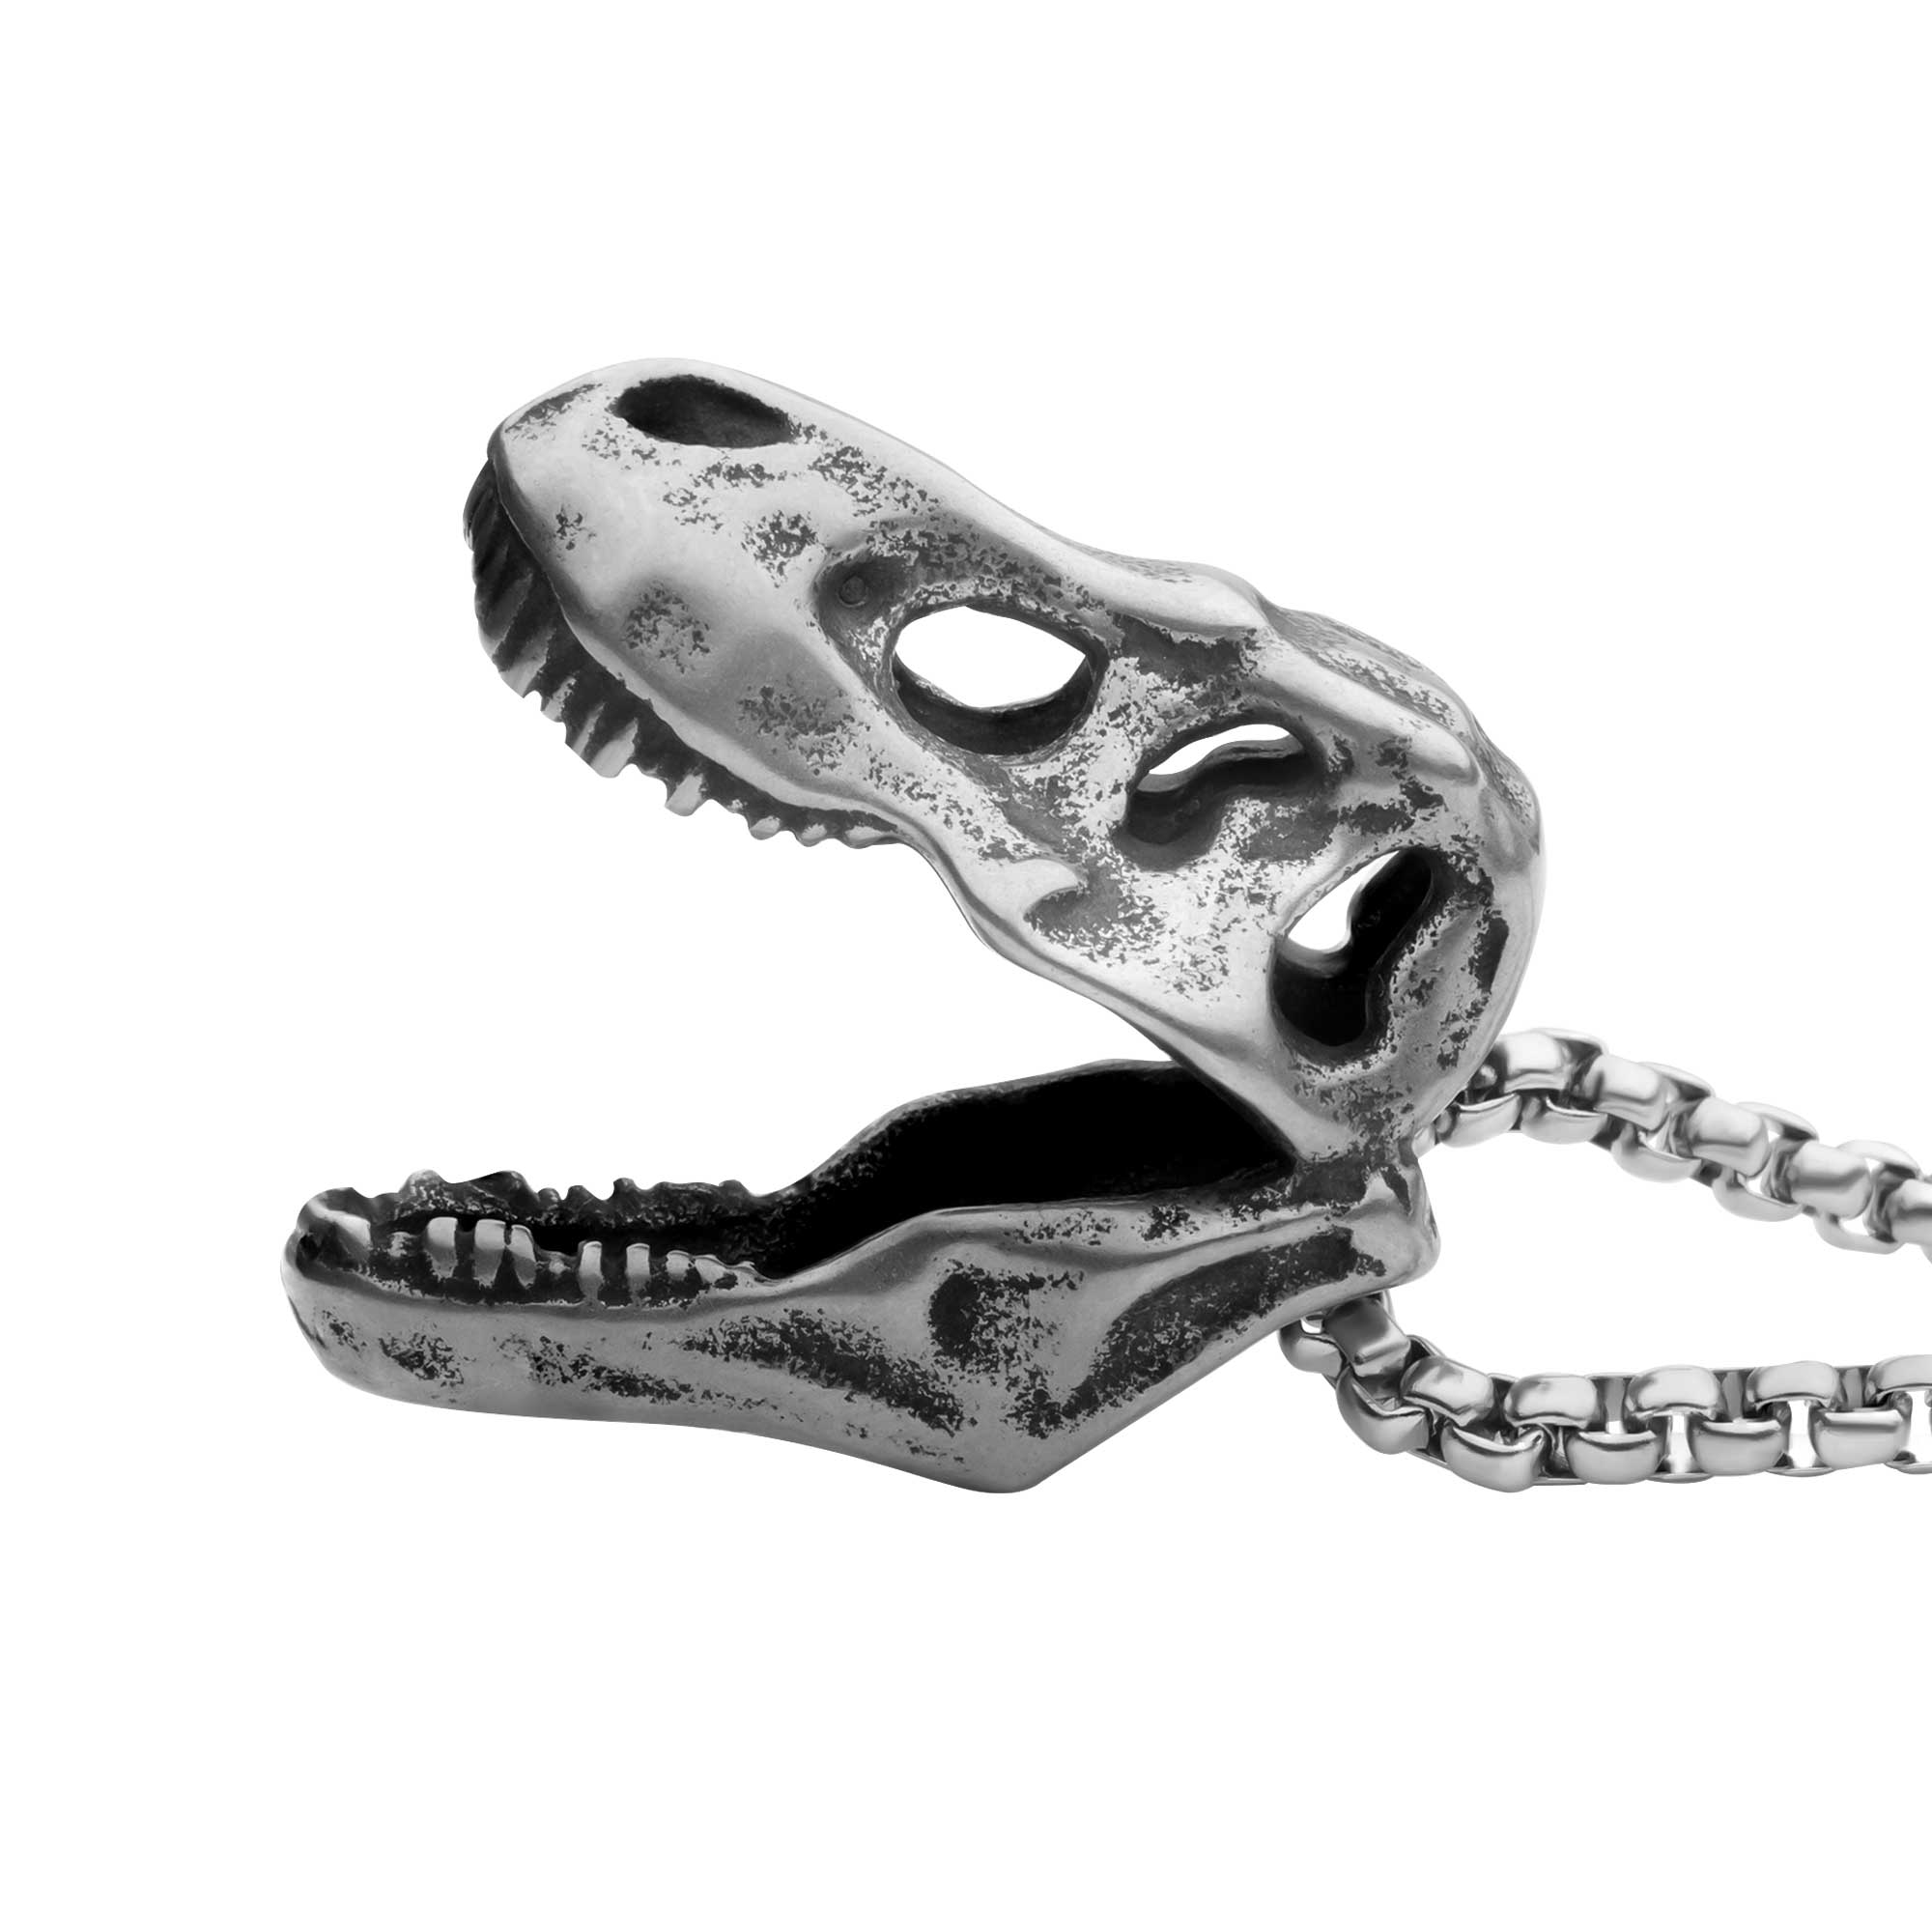 Distressed Matte Steel T-Rex Skull Pendant with Chain Image 3 Spath Jewelers Bartow, FL